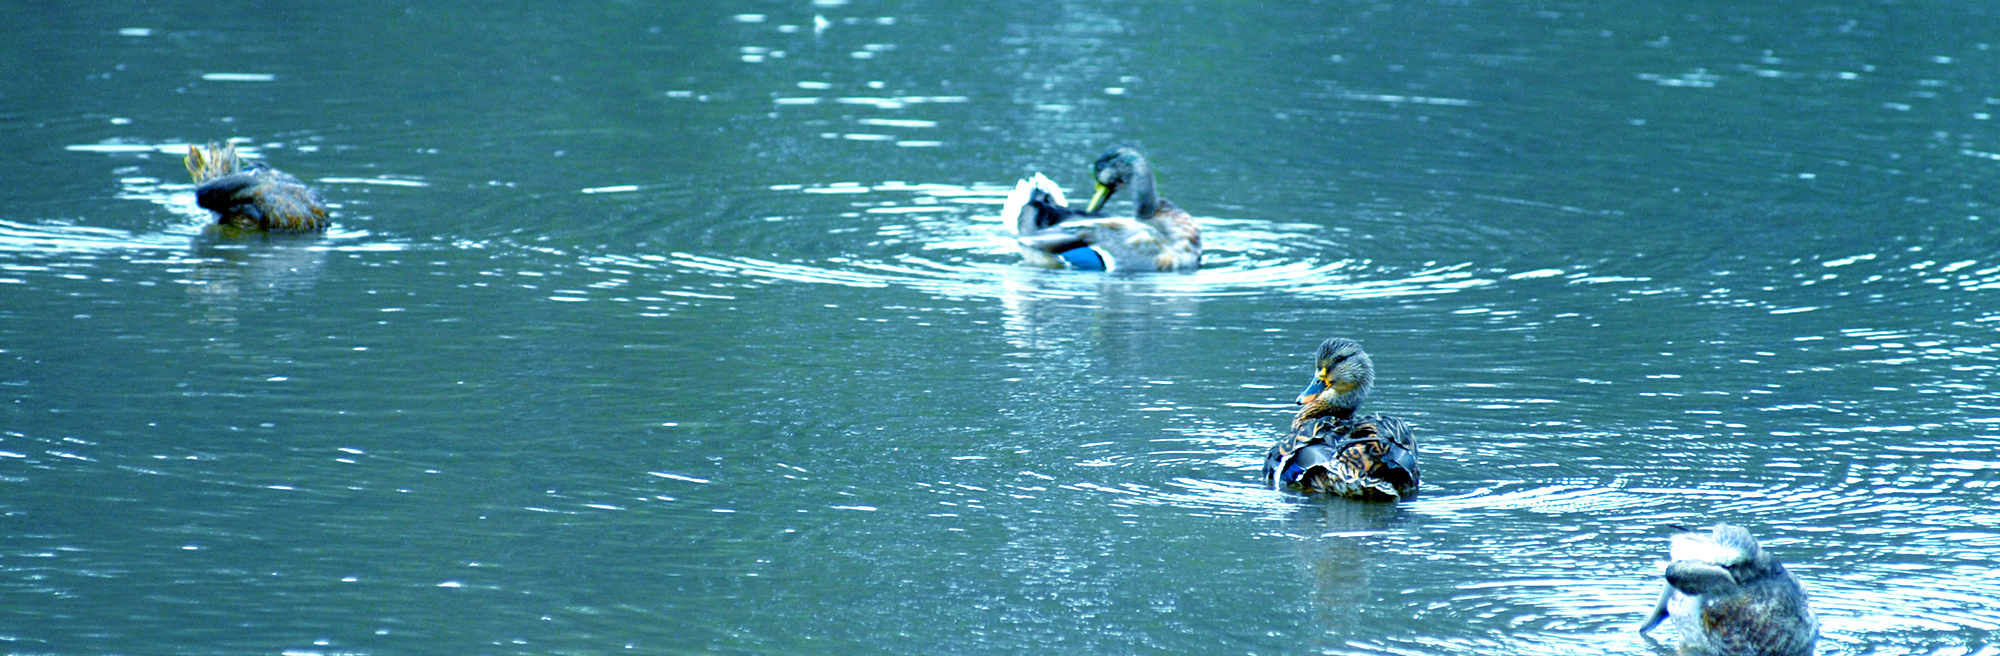 Calm, blue waters with several ducks floating.